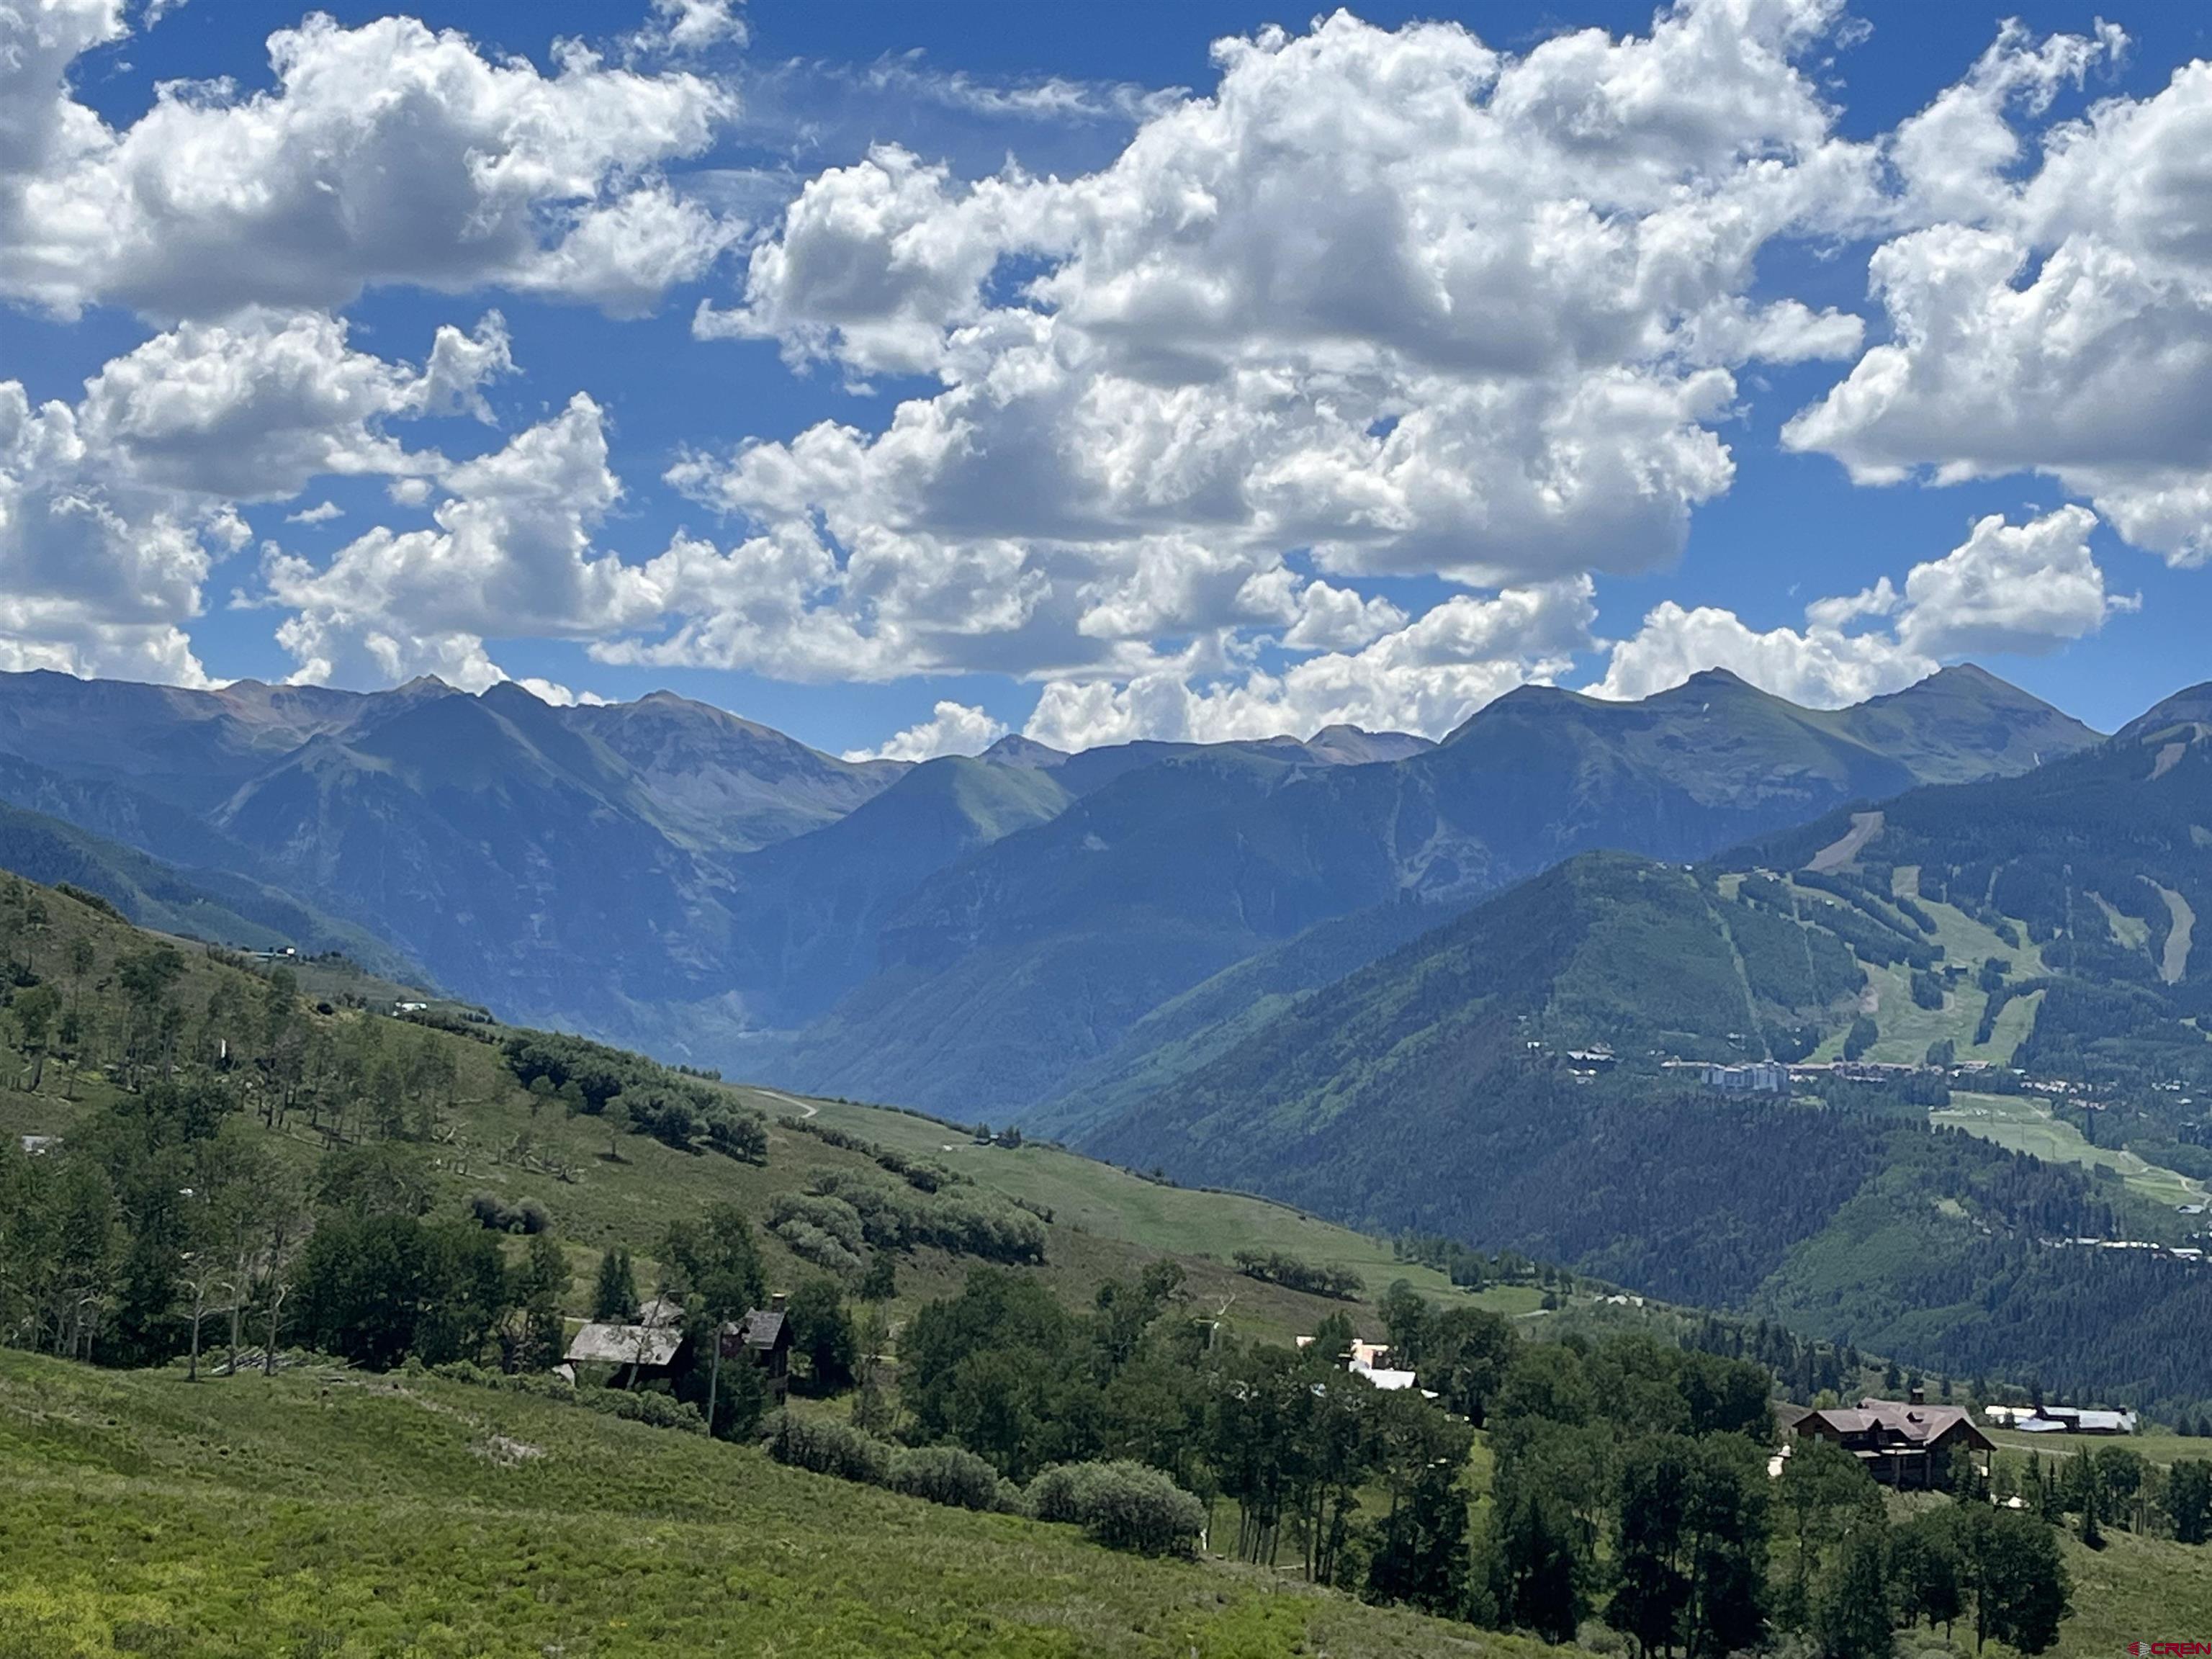 Astounding gorgeous views -Located just a few miles to the Town of Telluride and the Town of Mountain Village and 5 minute drive to the Telluride airport. A 3 acre lot in a beautiful high-end, quiet subdivision.